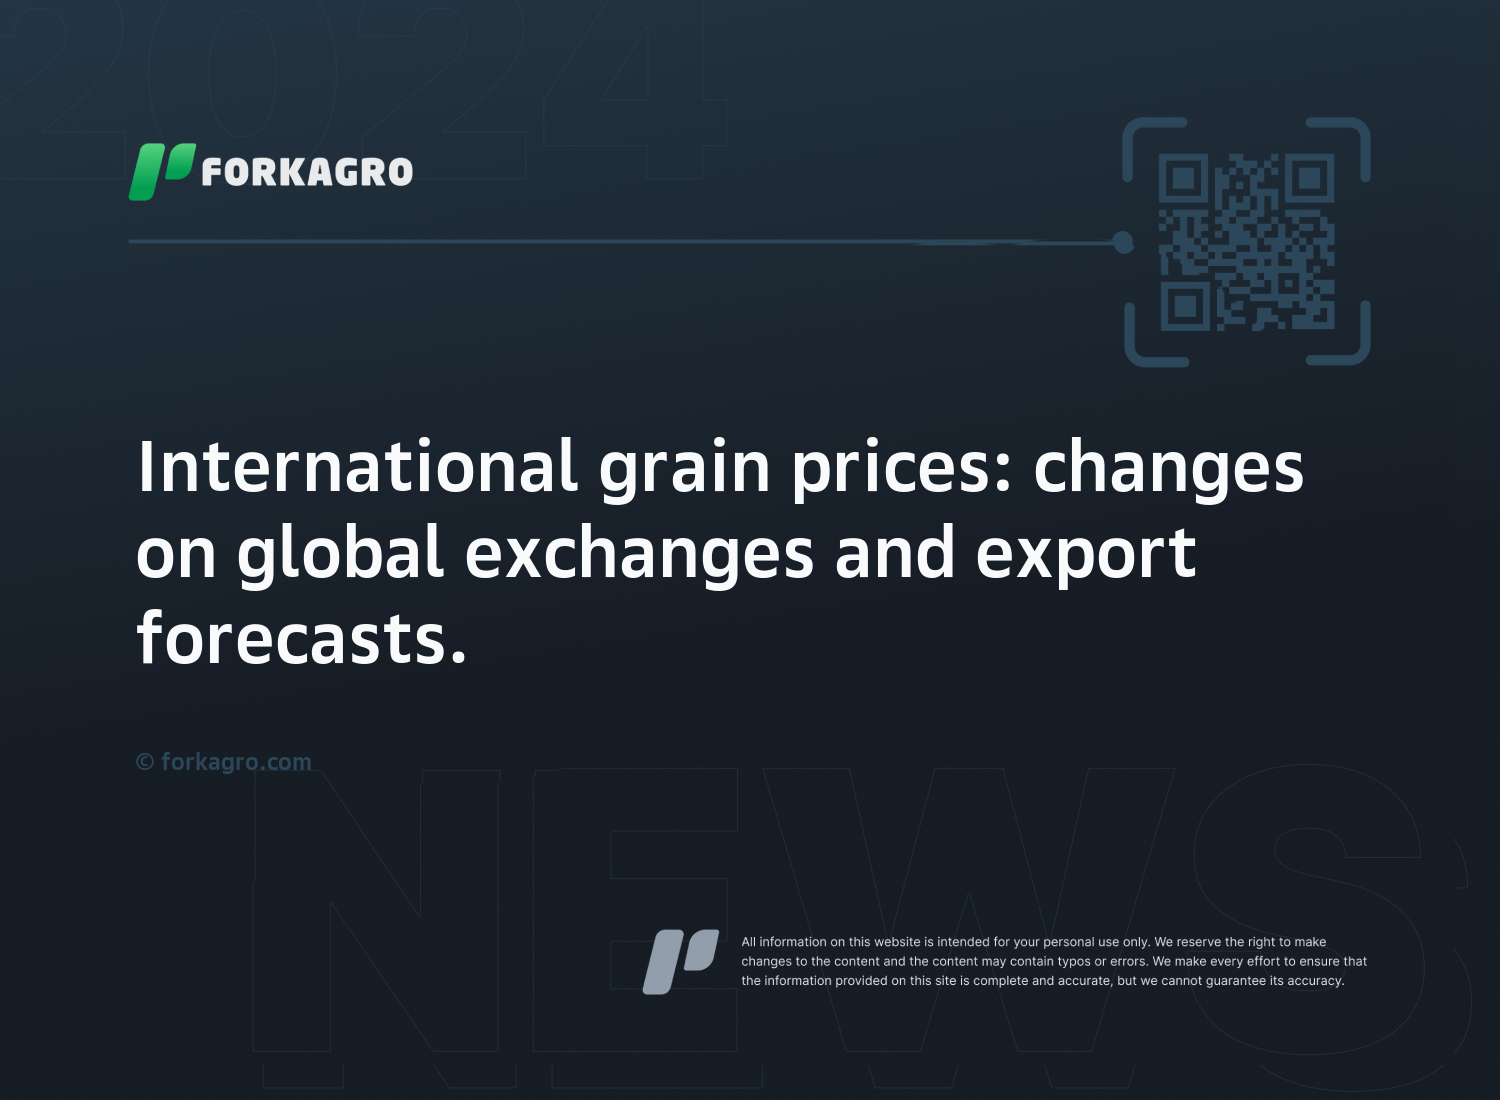 International grain prices: changes on global exchanges and export forecasts.